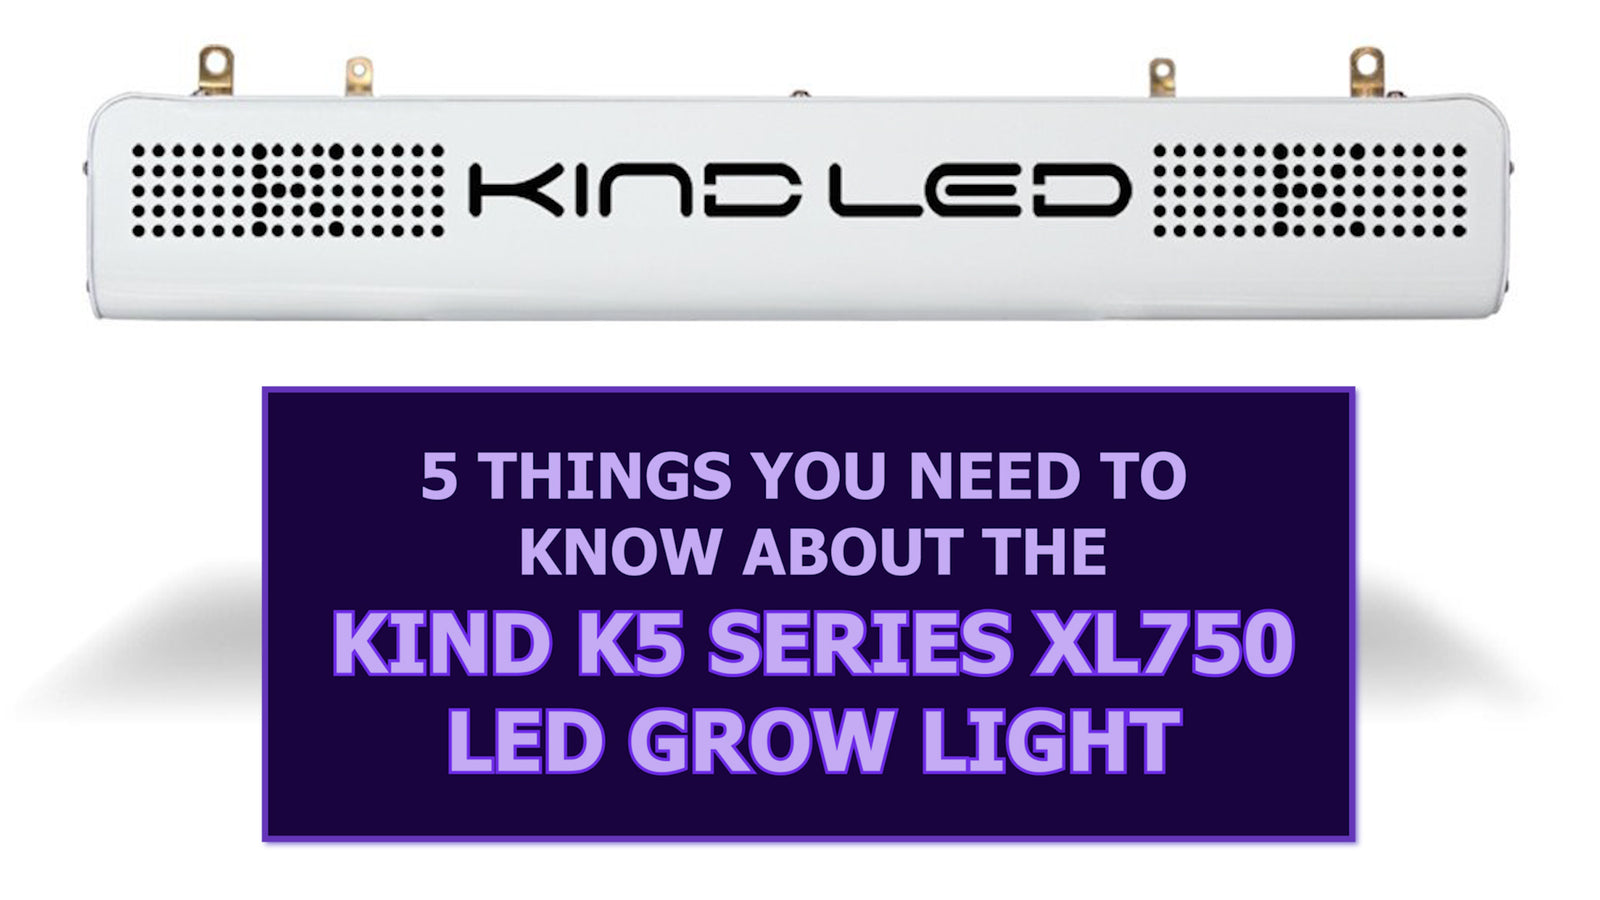 voldgrav Tænk fremad duft 5 Things You Need to Know about the Kind K5 series XL750 LED Grow Ligh -  Trimleaf